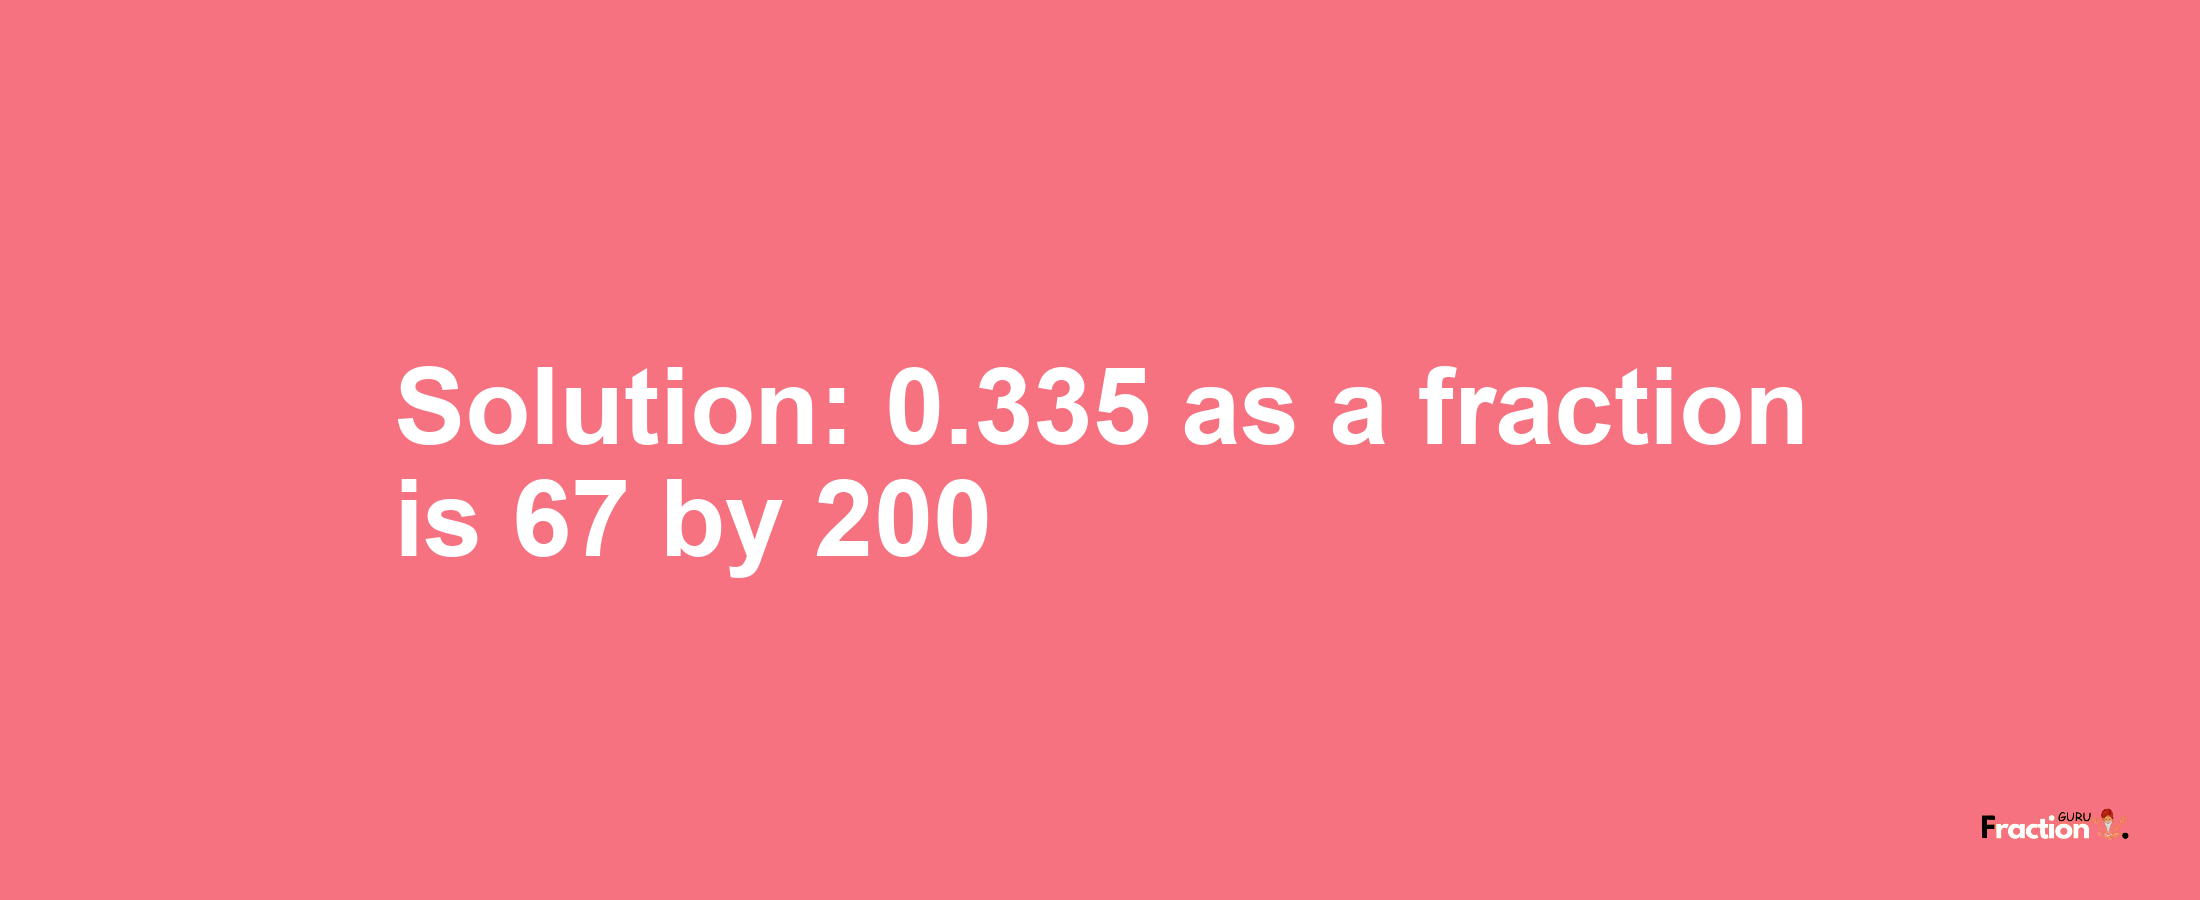 Solution:0.335 as a fraction is 67/200